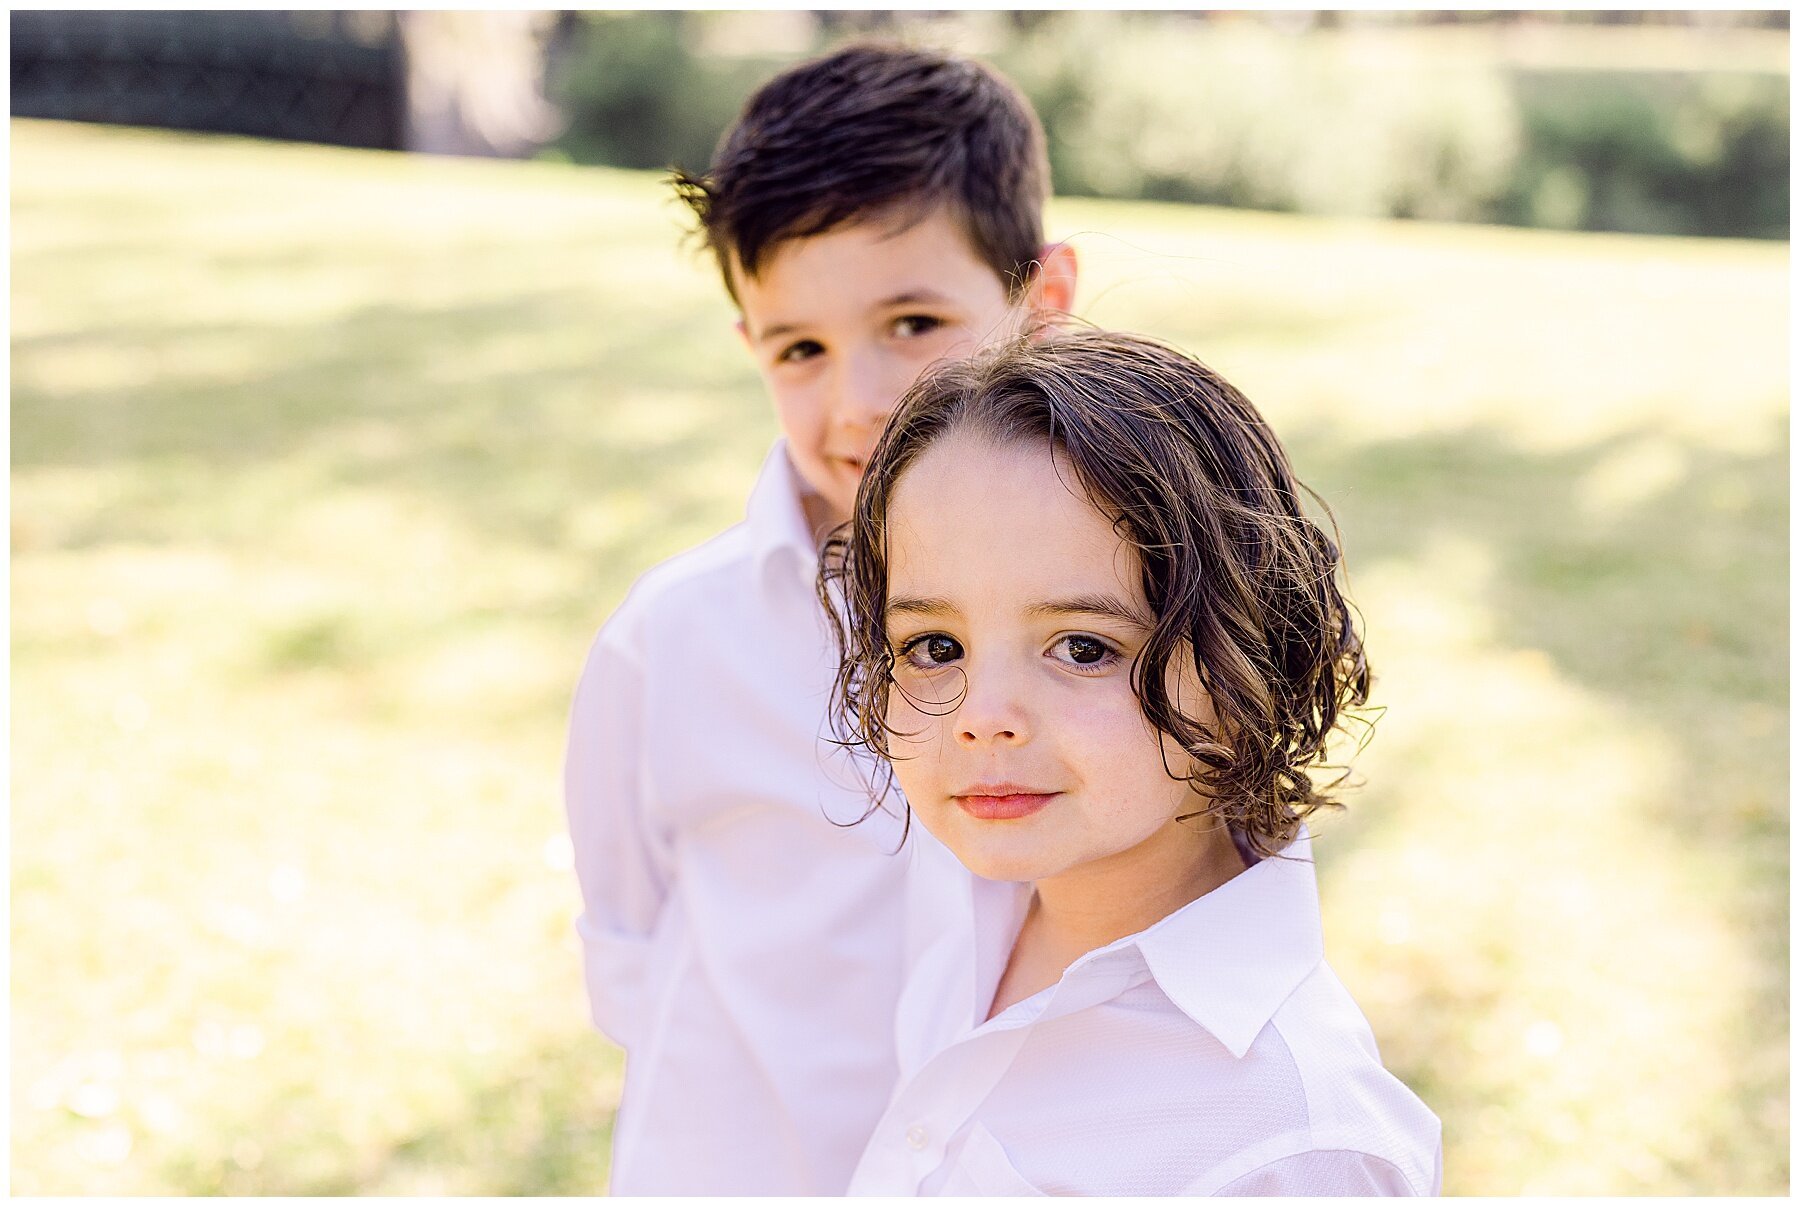 Katherine_Ives_Photography_Sallah_Palmetto_Bluff_Family_Session_32.JPG